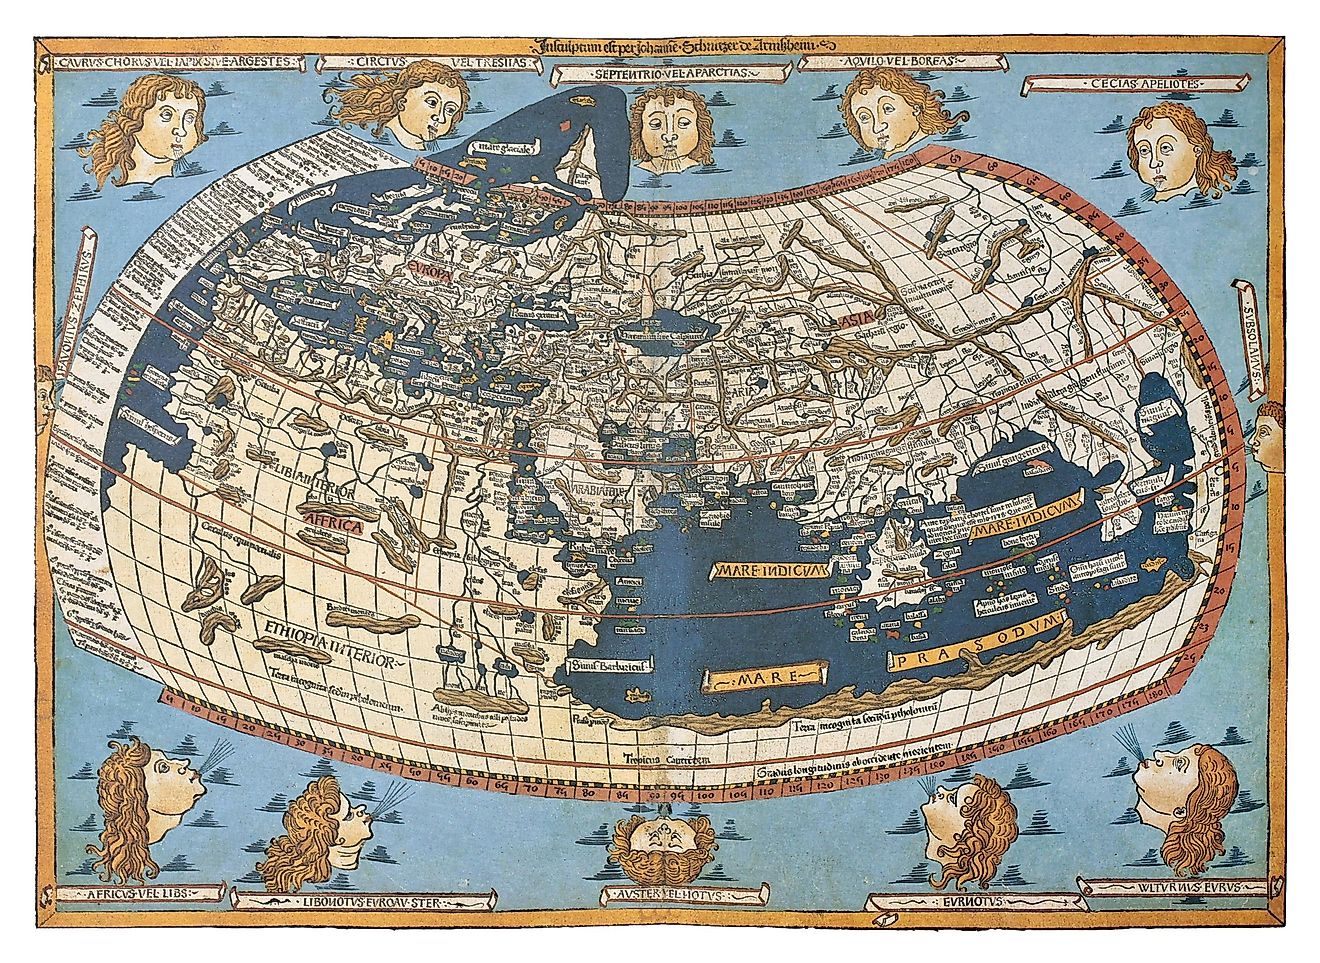 ptolemy's map of the world